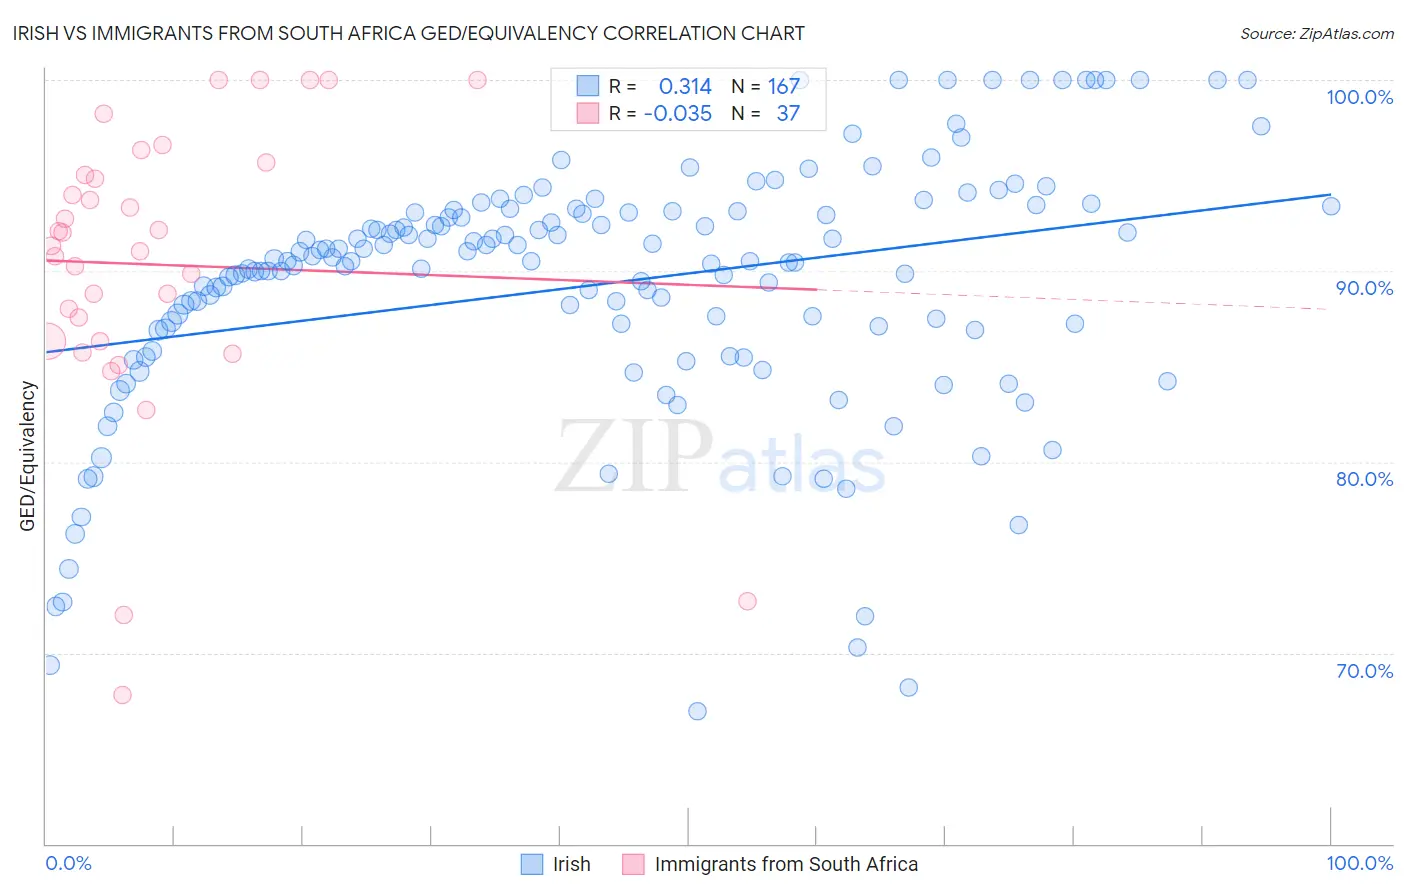 Irish vs Immigrants from South Africa GED/Equivalency